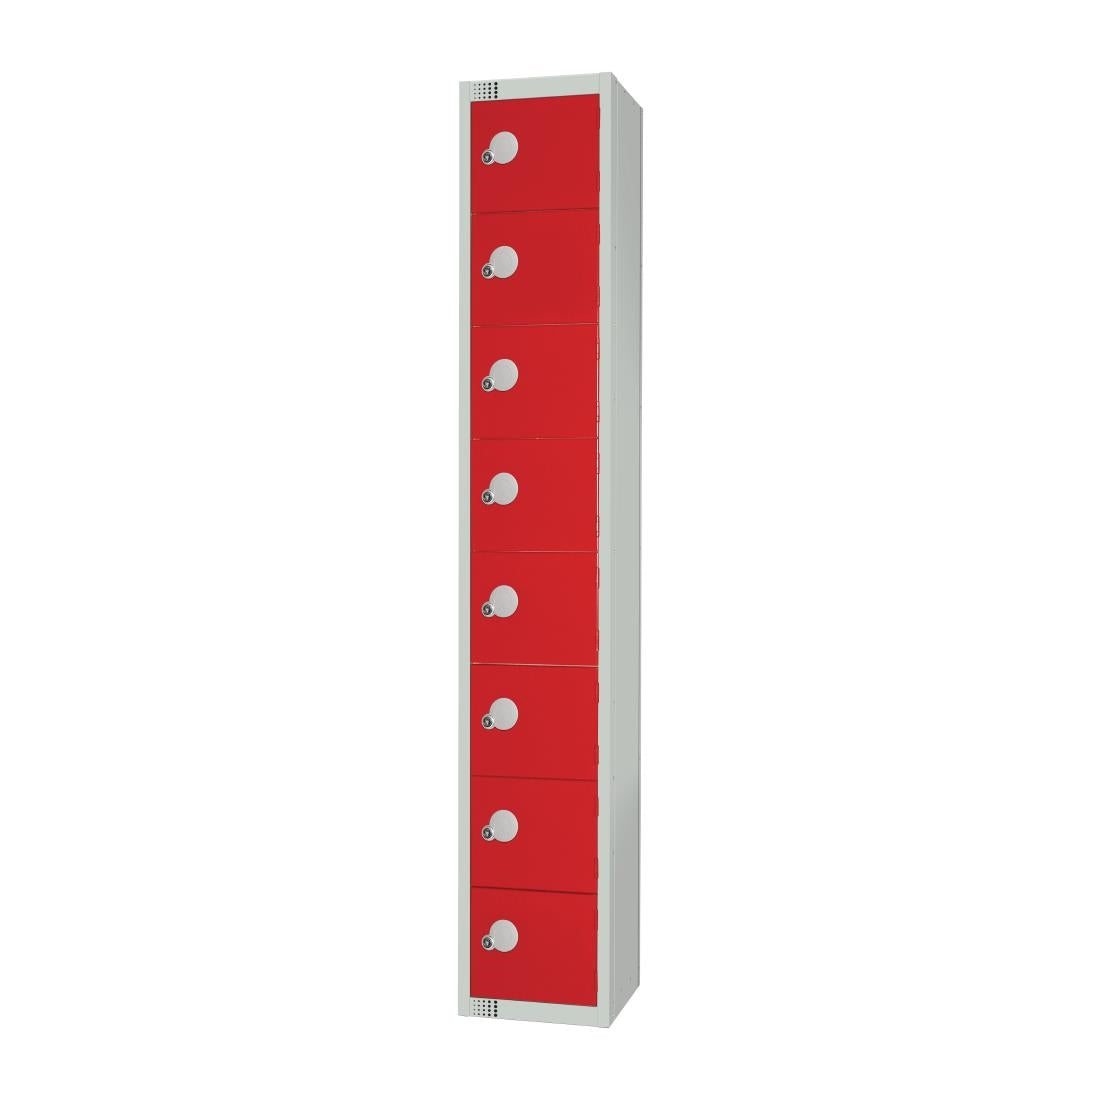 CE108-CNS Elite Eight Door Coin Return Locker with Sloping Top Red JD Catering Equipment Solutions Ltd